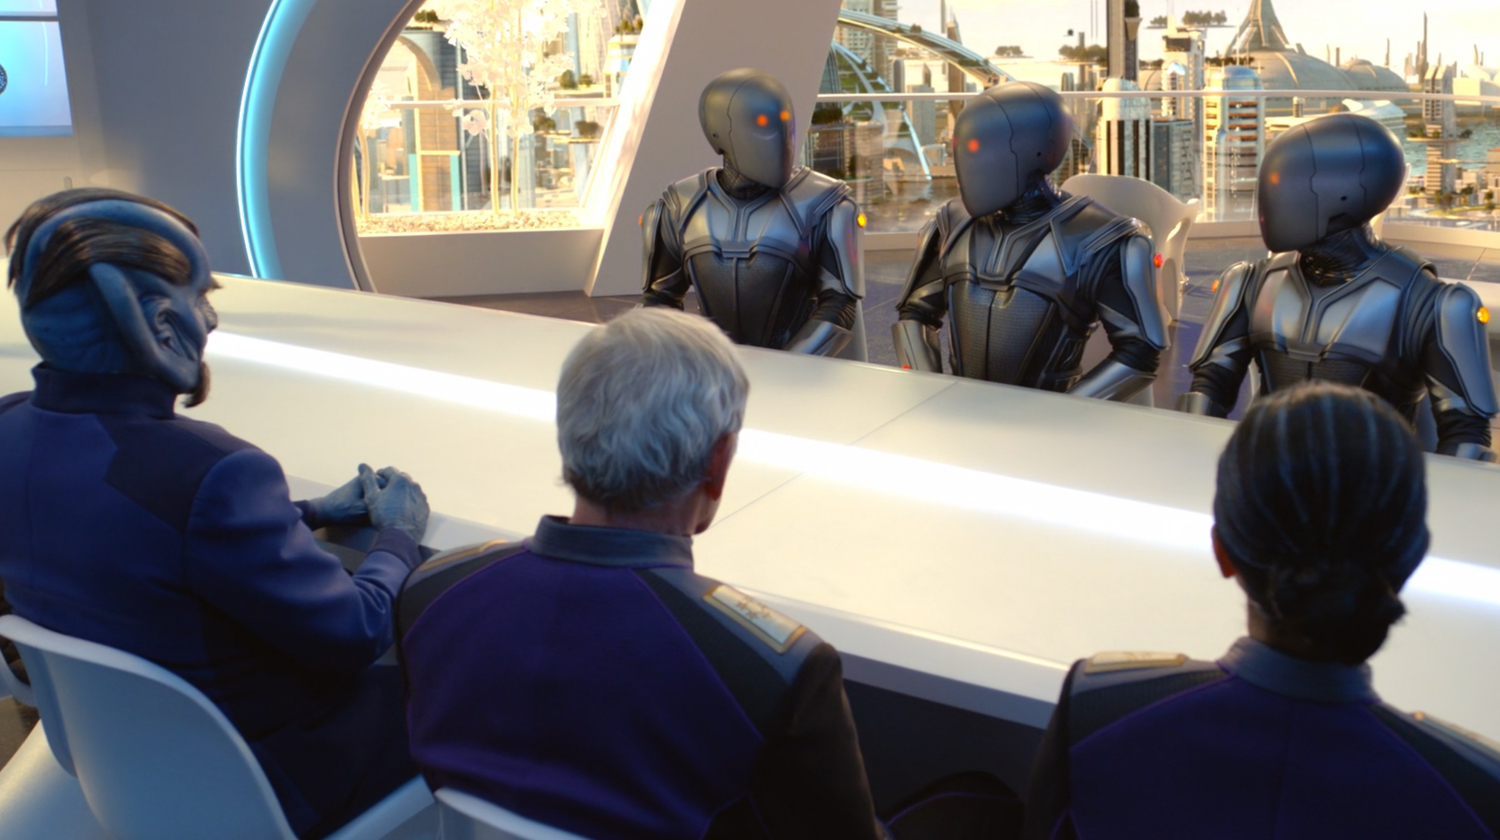 Members of different alien species sit down for a discussion at a large, white table. A futuristic cityscape can be seen out a large window behind them.